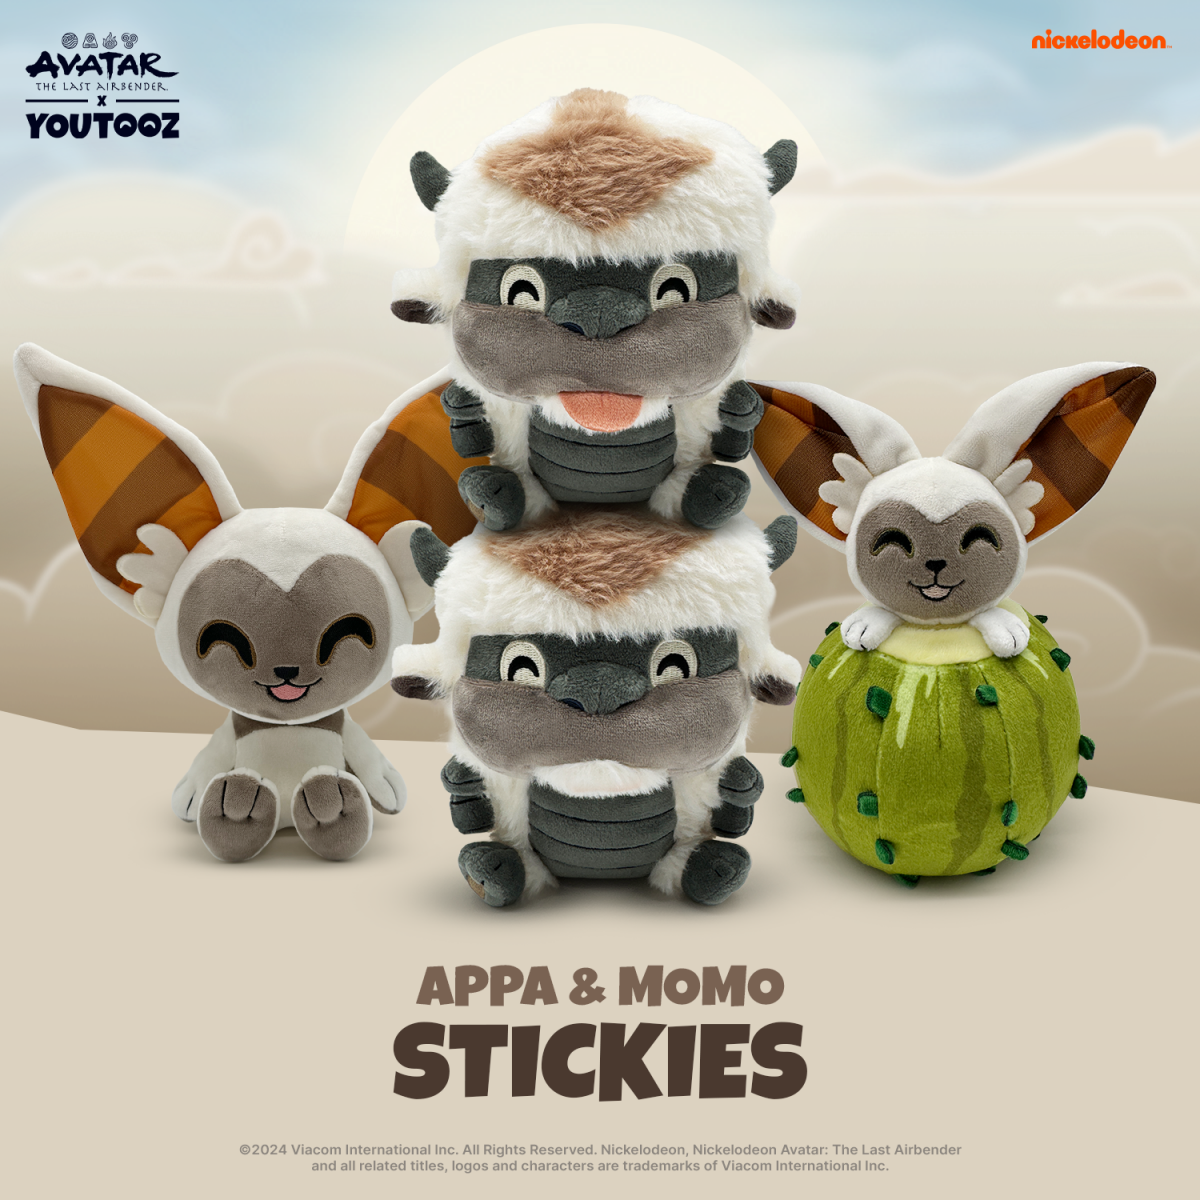 Avatar the last airbender new Youtooz line, Appa and Momo magnetic stickies plushes